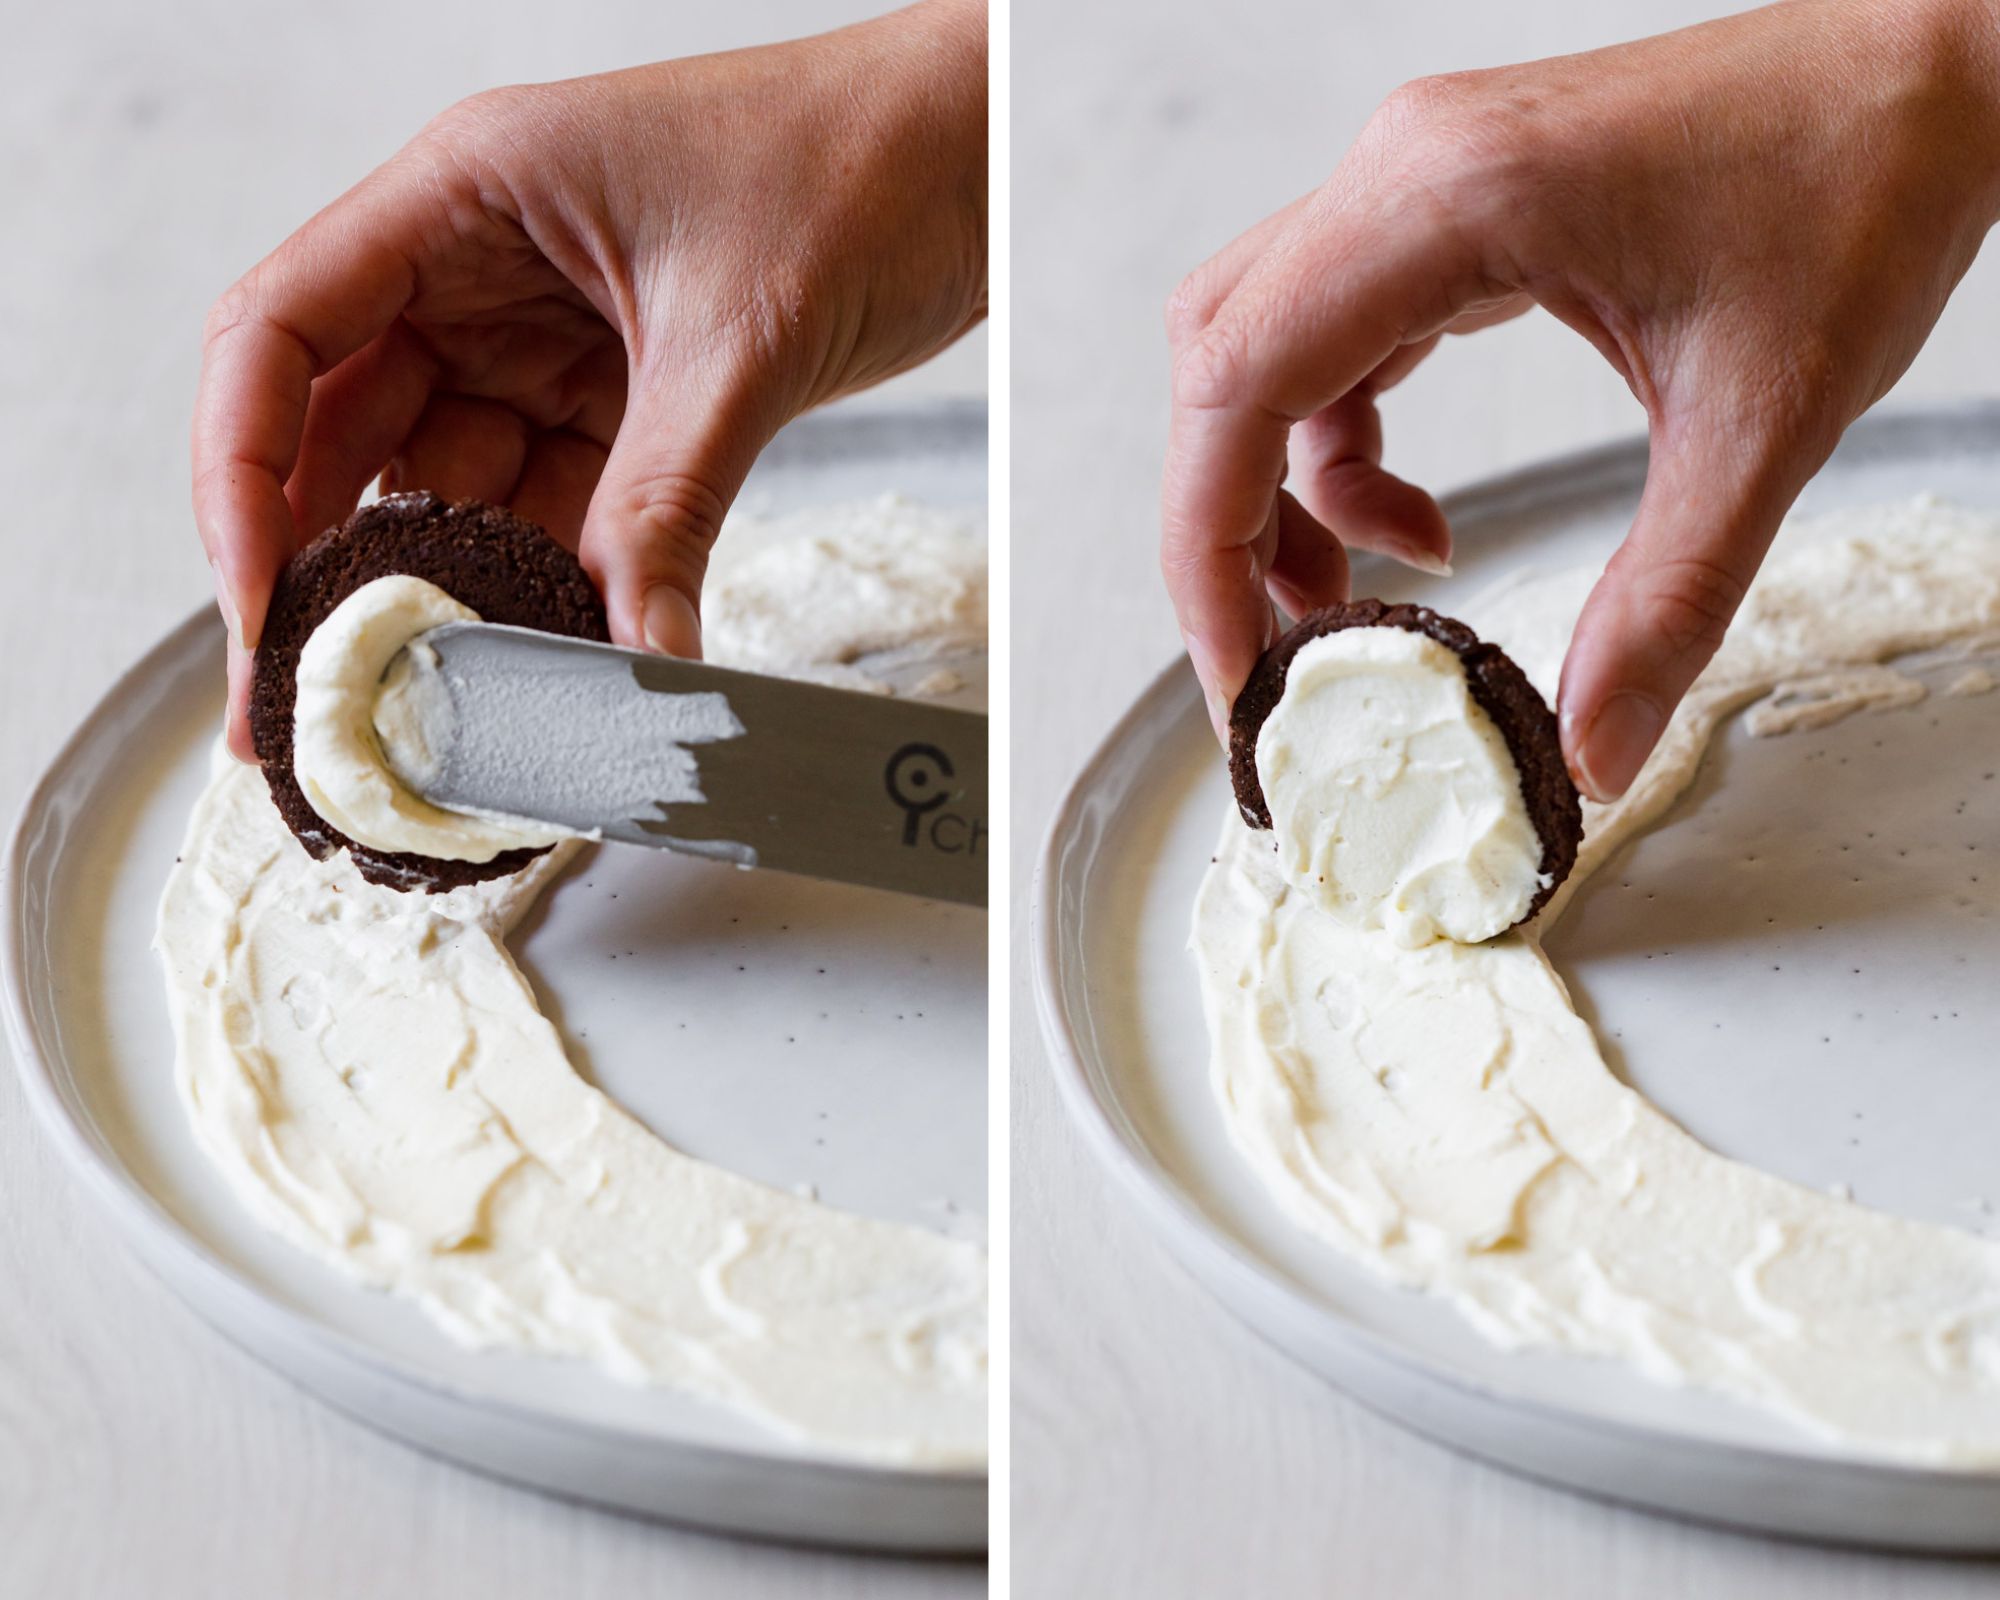 Spreading whipped cream into one choc ripple biscuit.